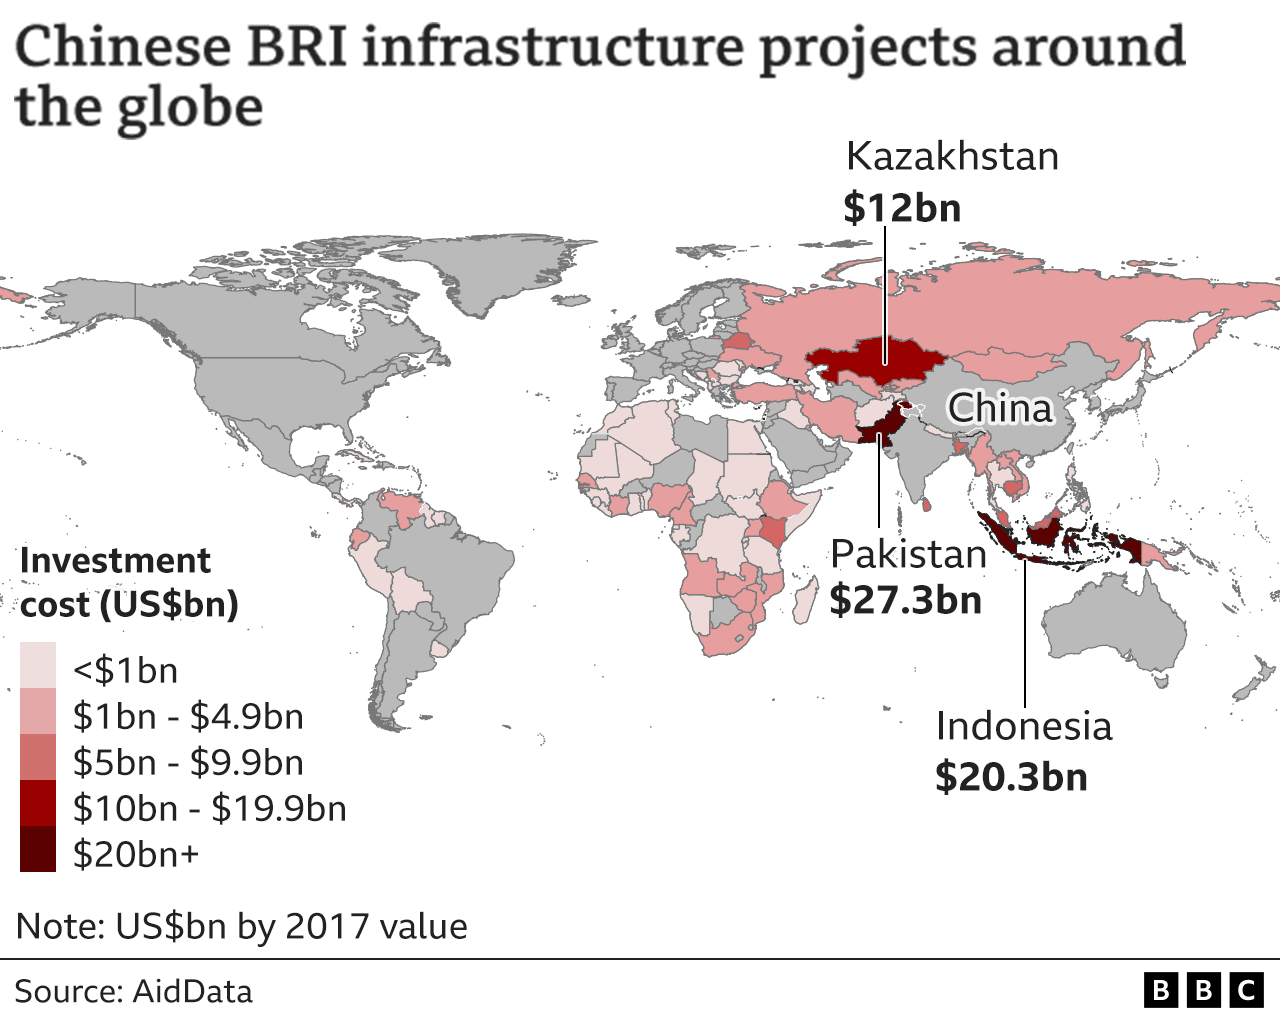 Map showing the combined value of China's infrastructure projects in different countries around the world.